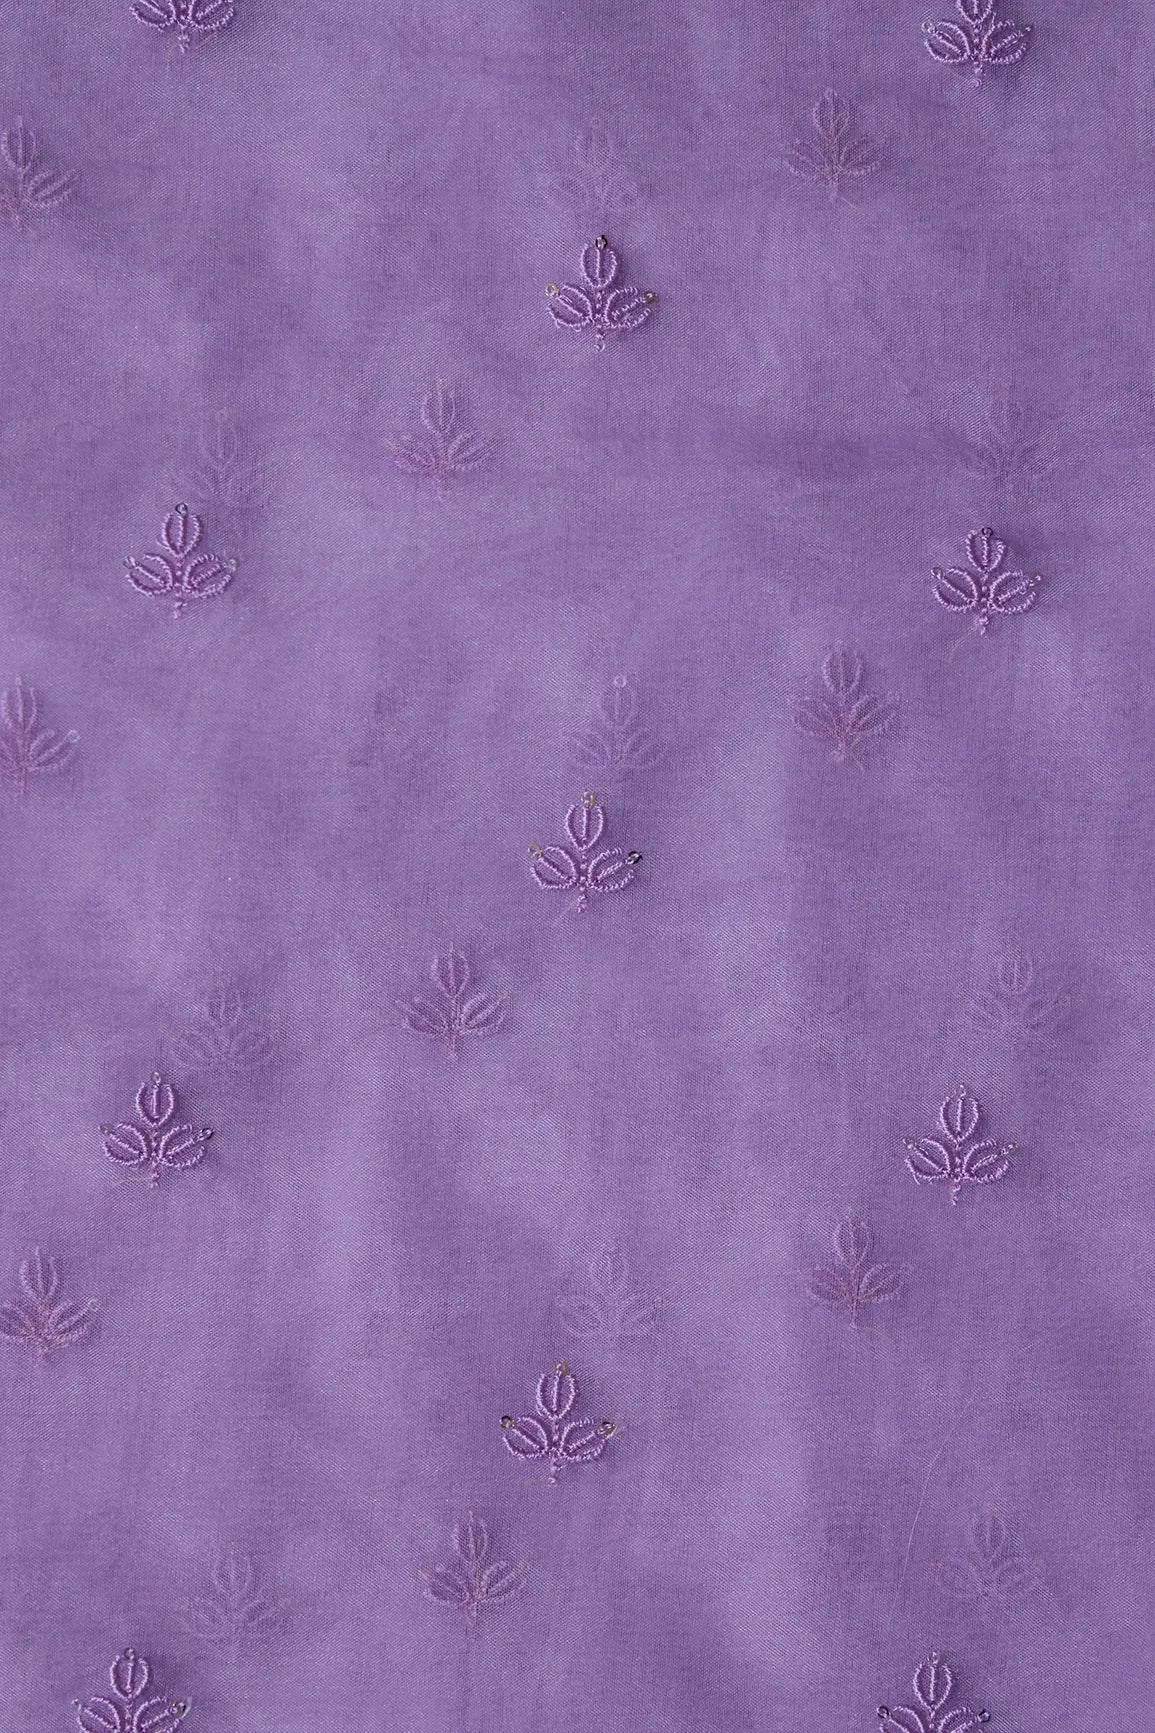 Lavender Thread With Sequins Beautiful Small Leafy Embroidery Work On Lavender Organza Fabric - doeraa